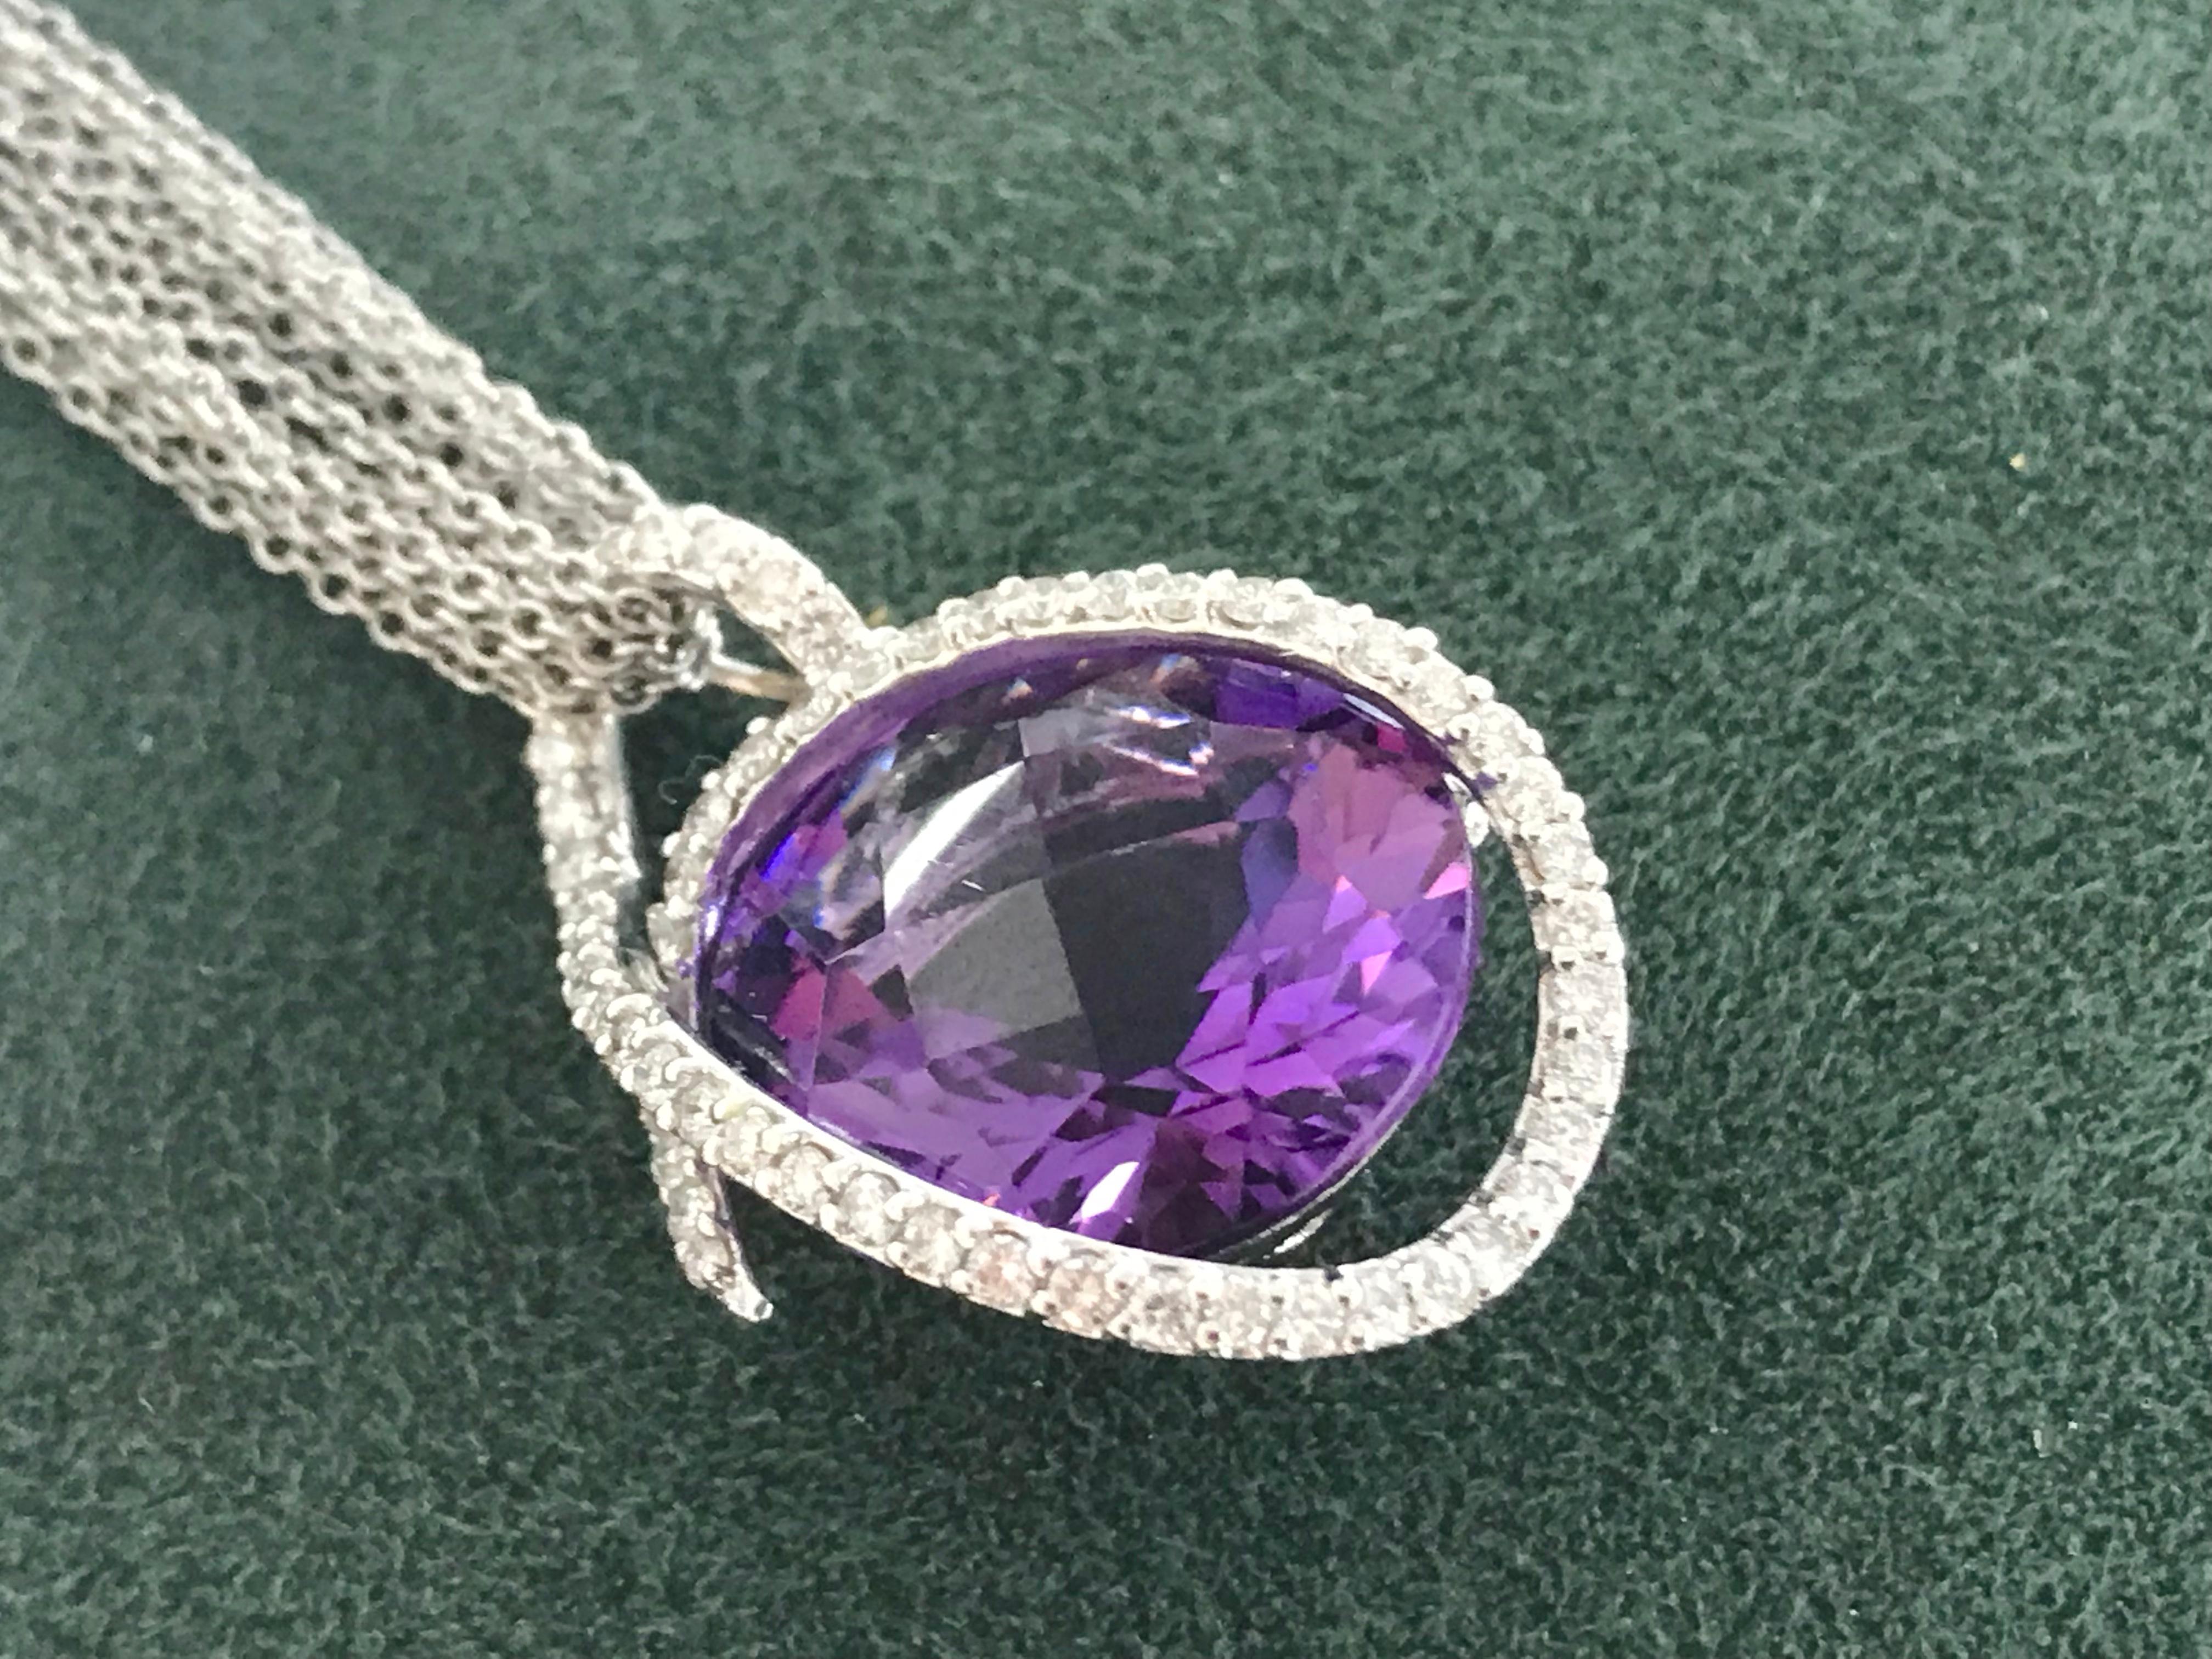 18K white gold large faceted amethyst wrapped in a diamond ribbon. The amethyst weighs 18.00 carats and the diamonds weigh combined 0.95 carat. The pendant hangs on a 7 strand 18K white gold chain.